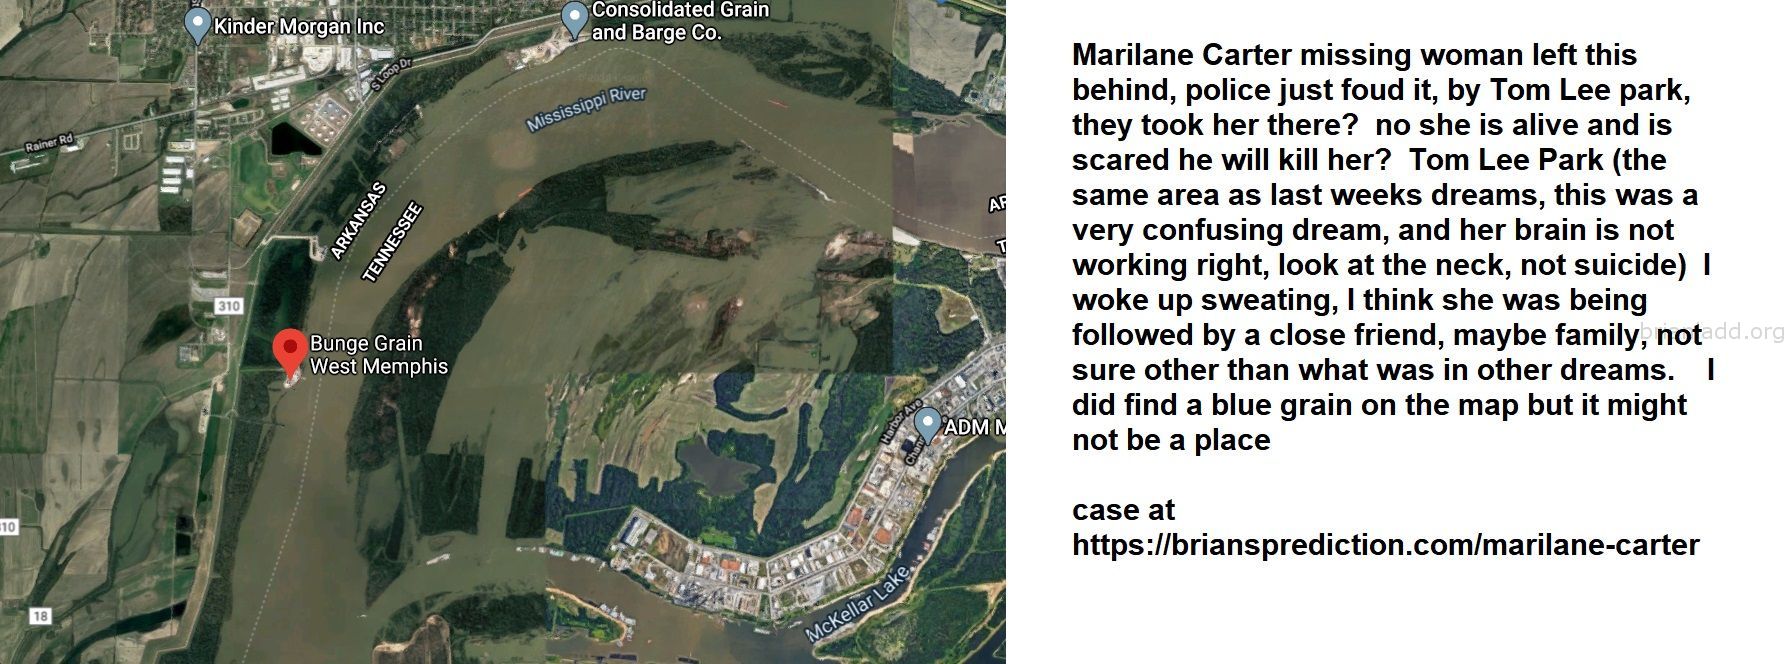 Marilane Carter Dream From August 11Th 2020 Search Map - 3 More Days Water...
3 More Days Water
